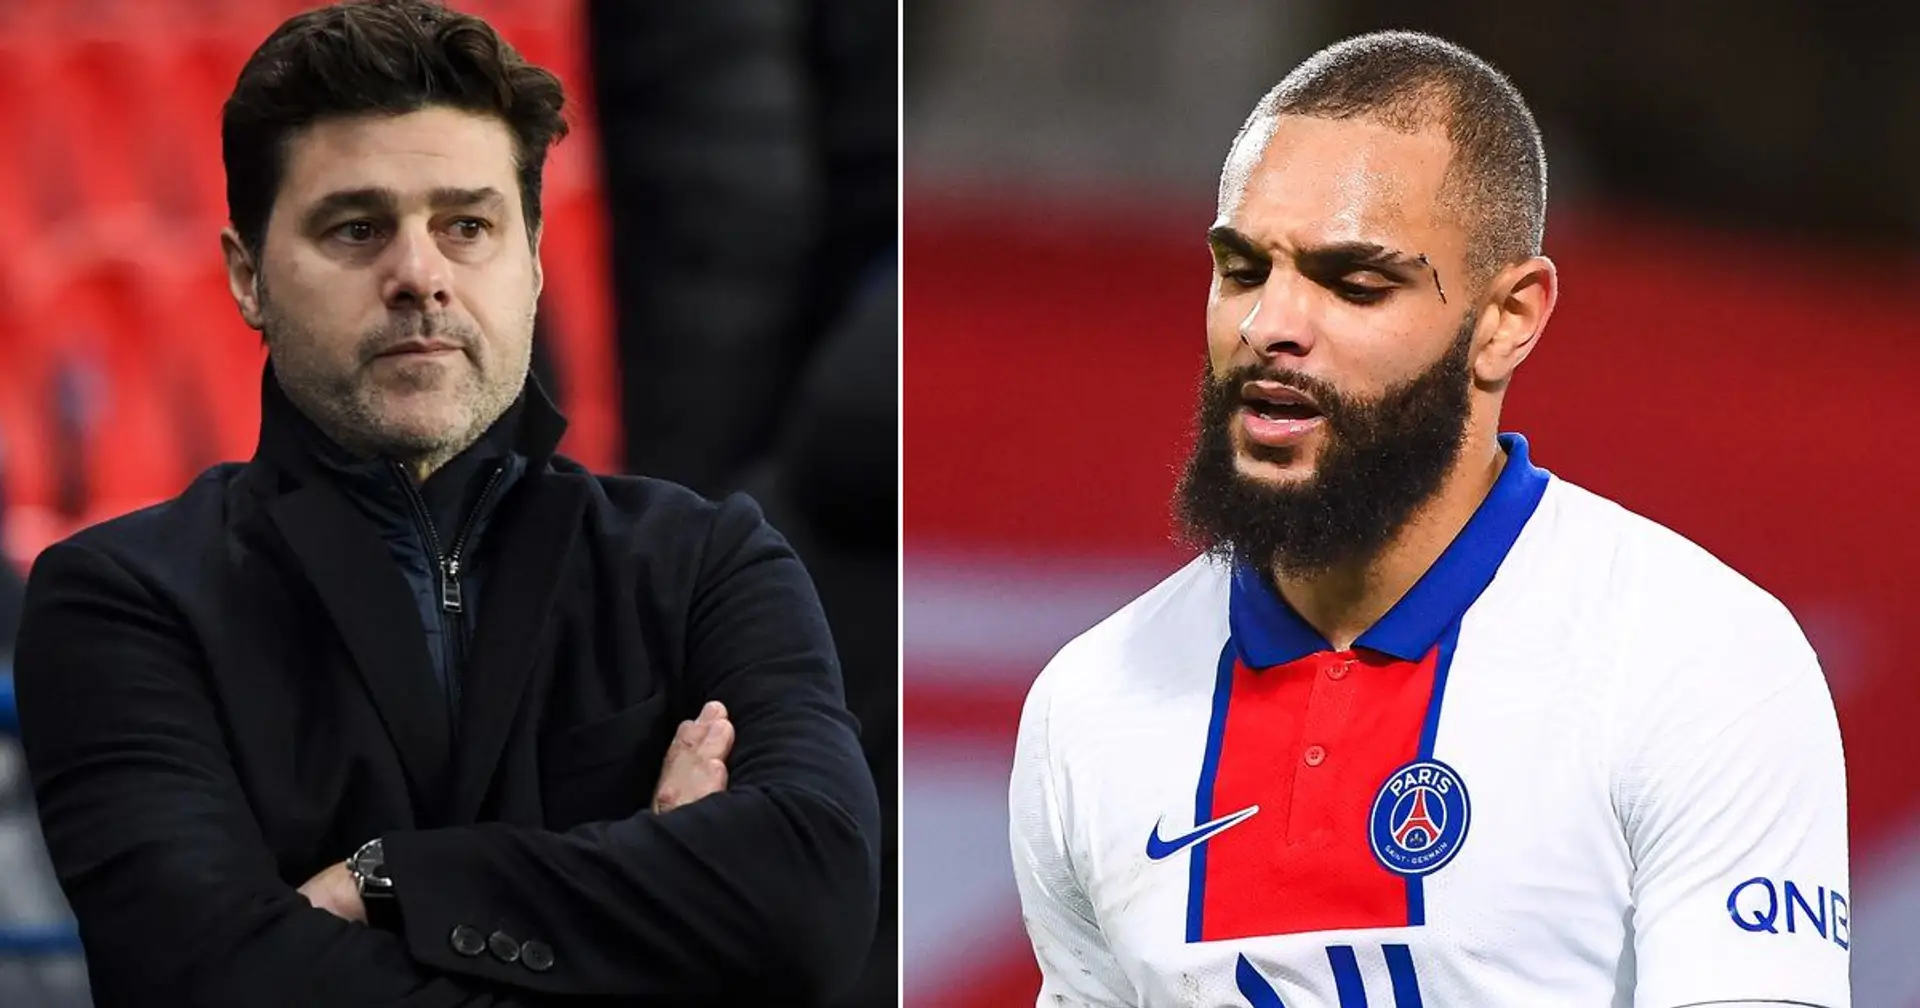 Kurzawa among 3 players Pochettino reportedly intends to cut from his squad this summer (reliability: 4 stars)